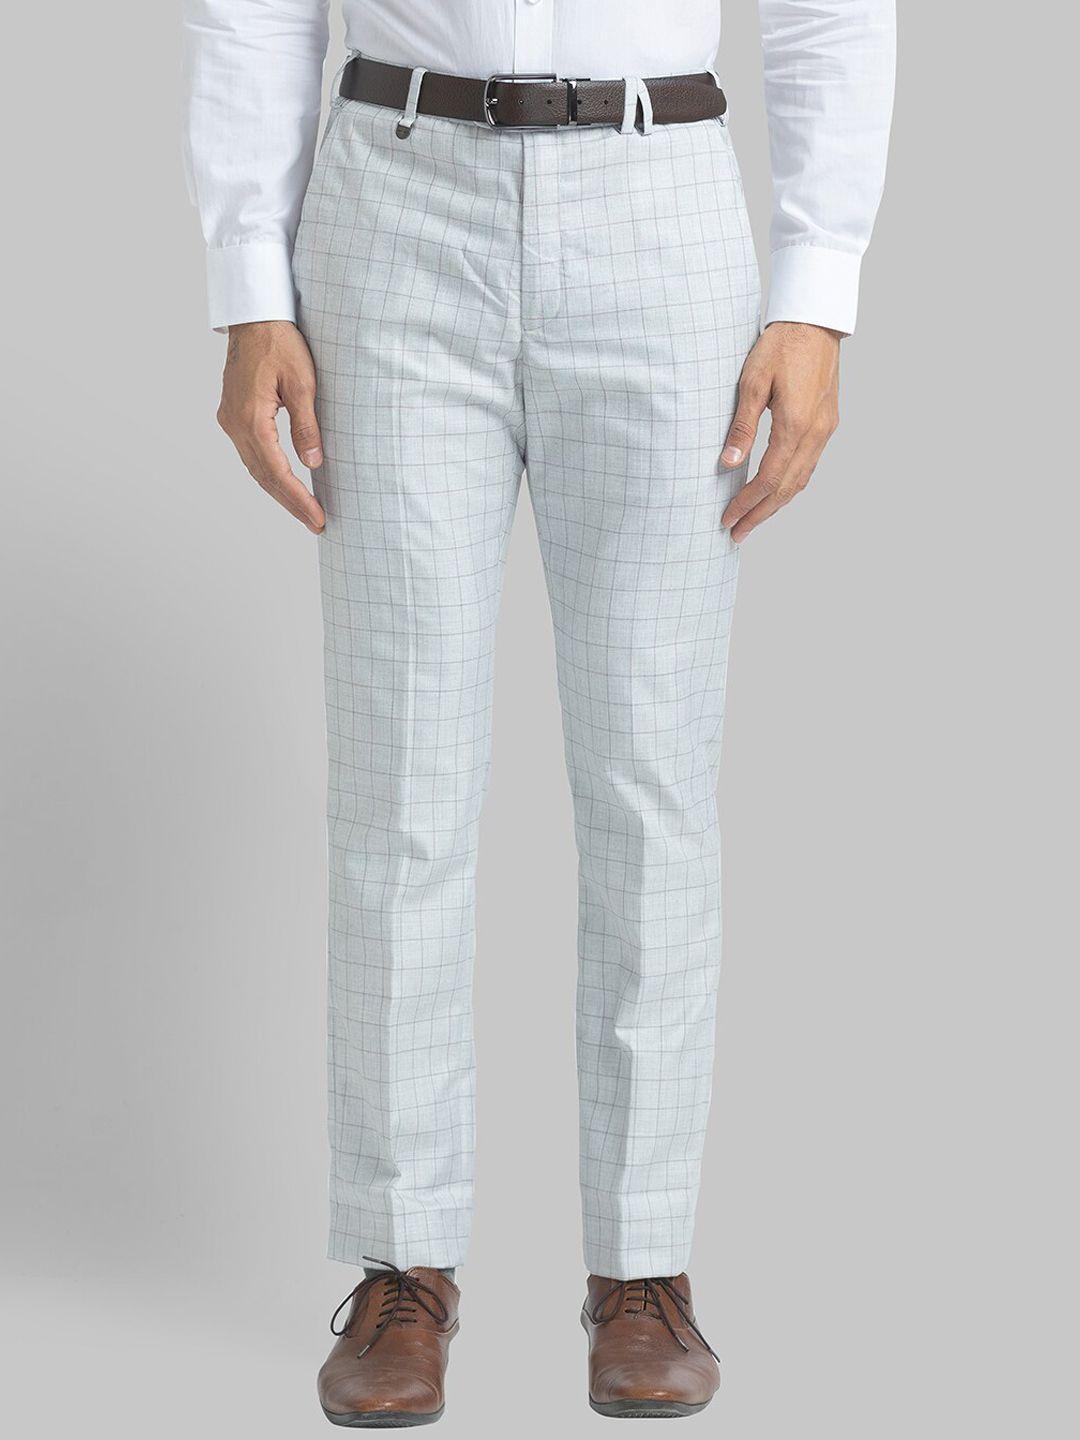 park-avenue-men-off-white-checked-slim-fit-trousers